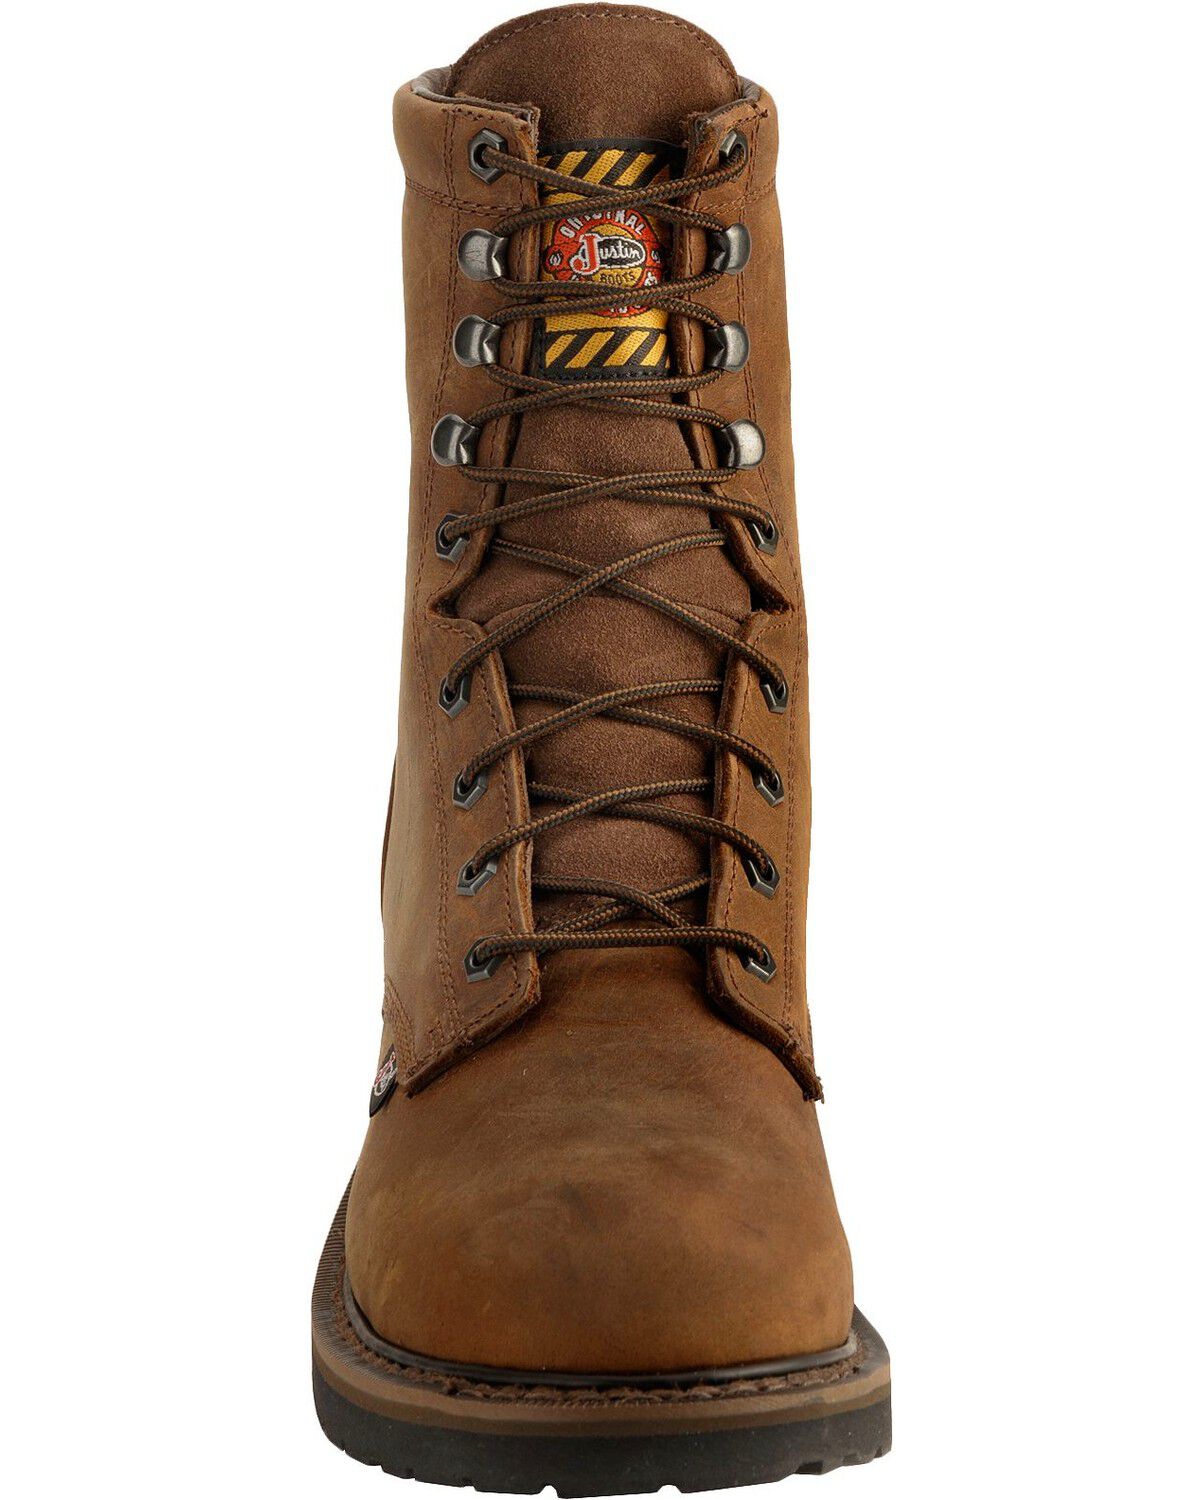 justin waterproof lace up boots